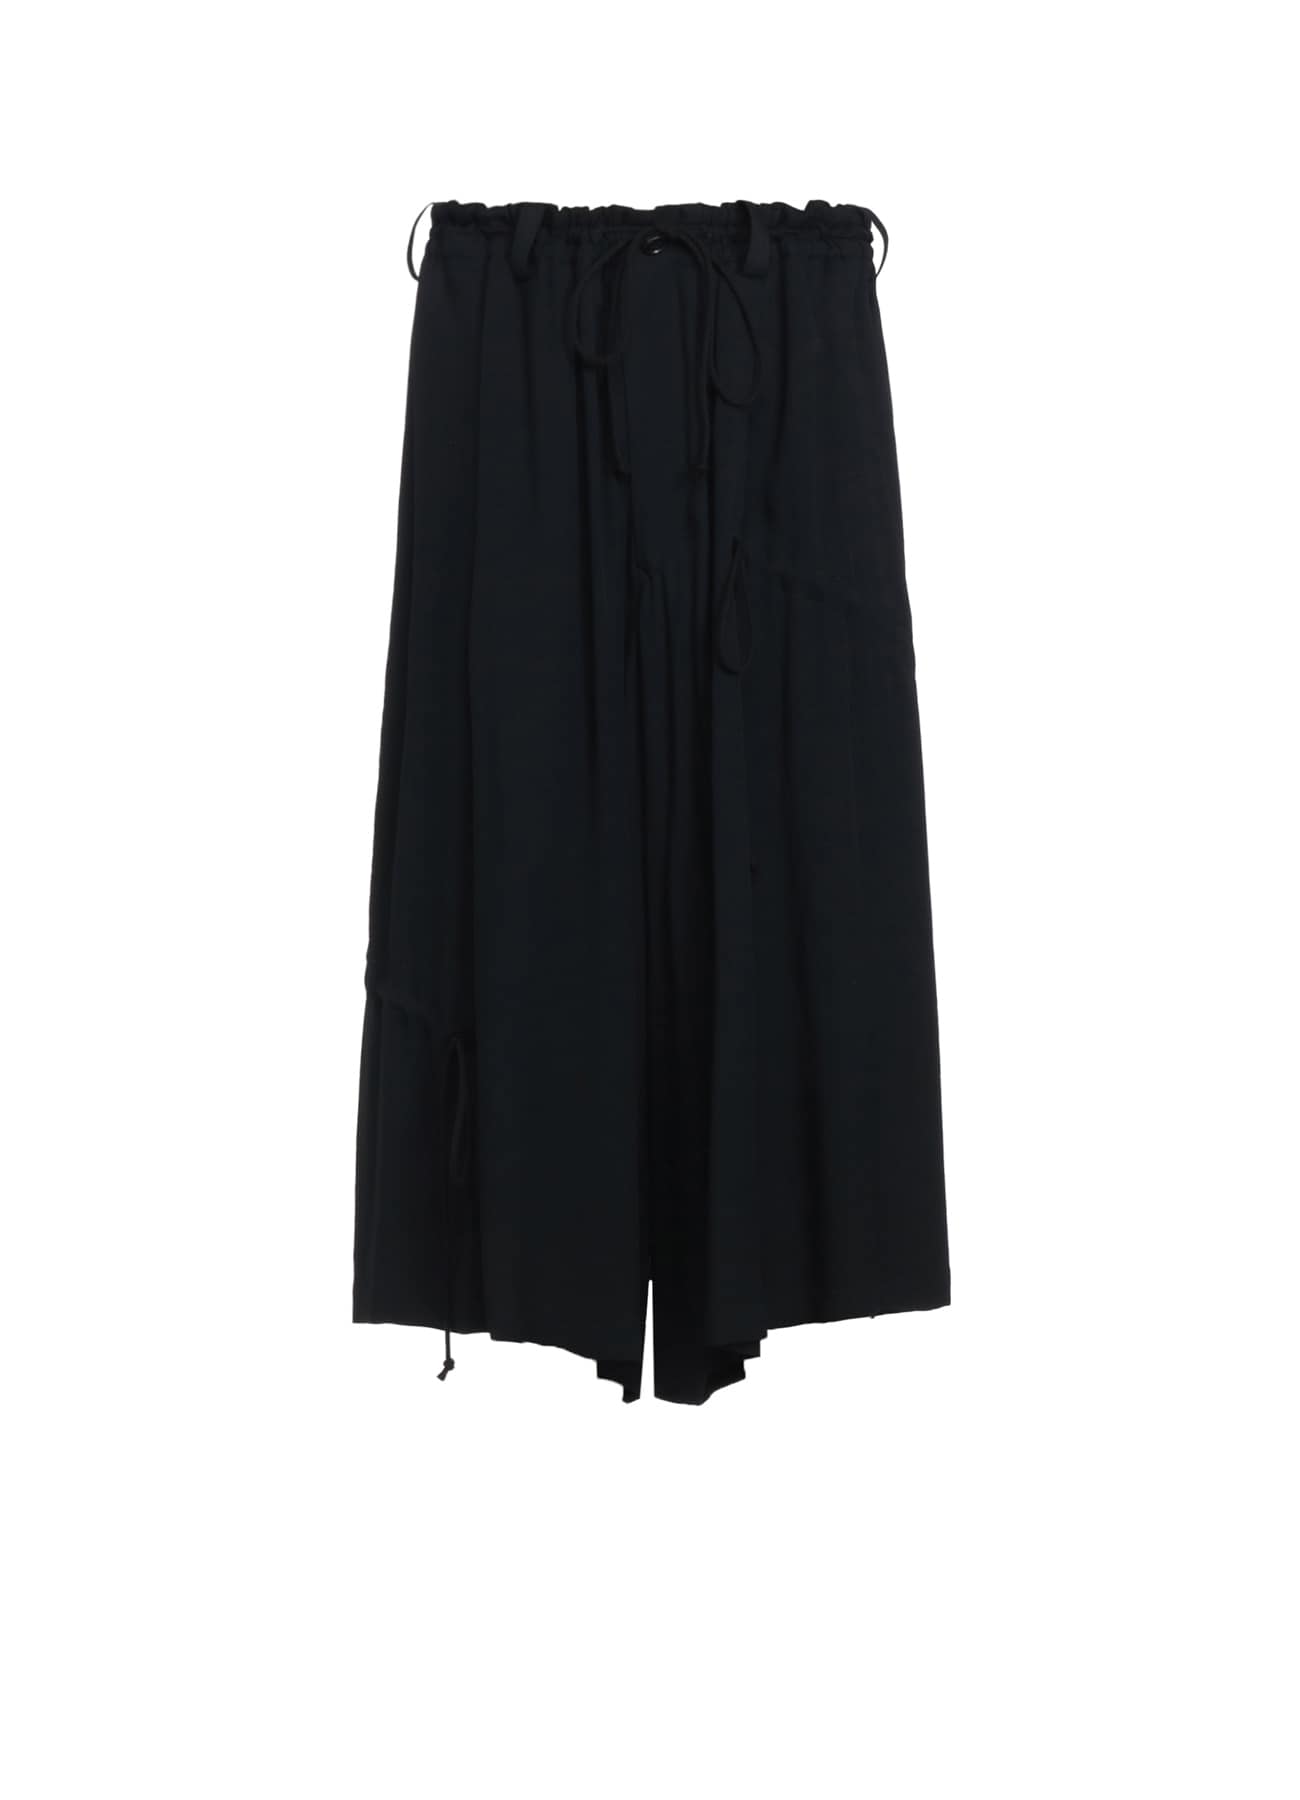 【5/23～5/28 Y's OMOTESANDO 先行販売】RAYON WASHER TWILL STRINGS GATHERED CROPPED PANTS